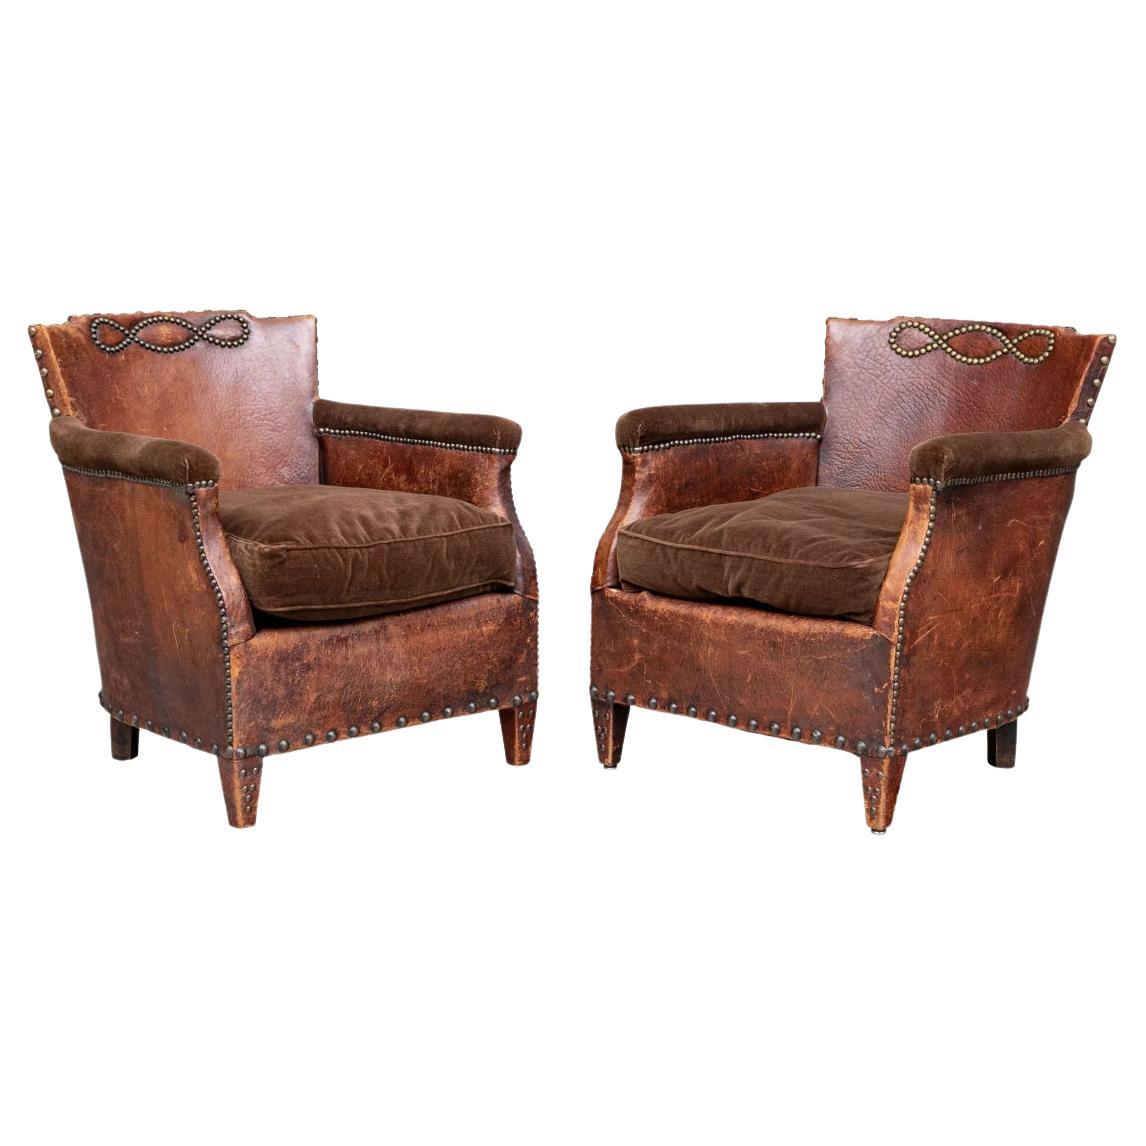 Pair Of Hollywood Regency Era Leather Armchairs for Restoration